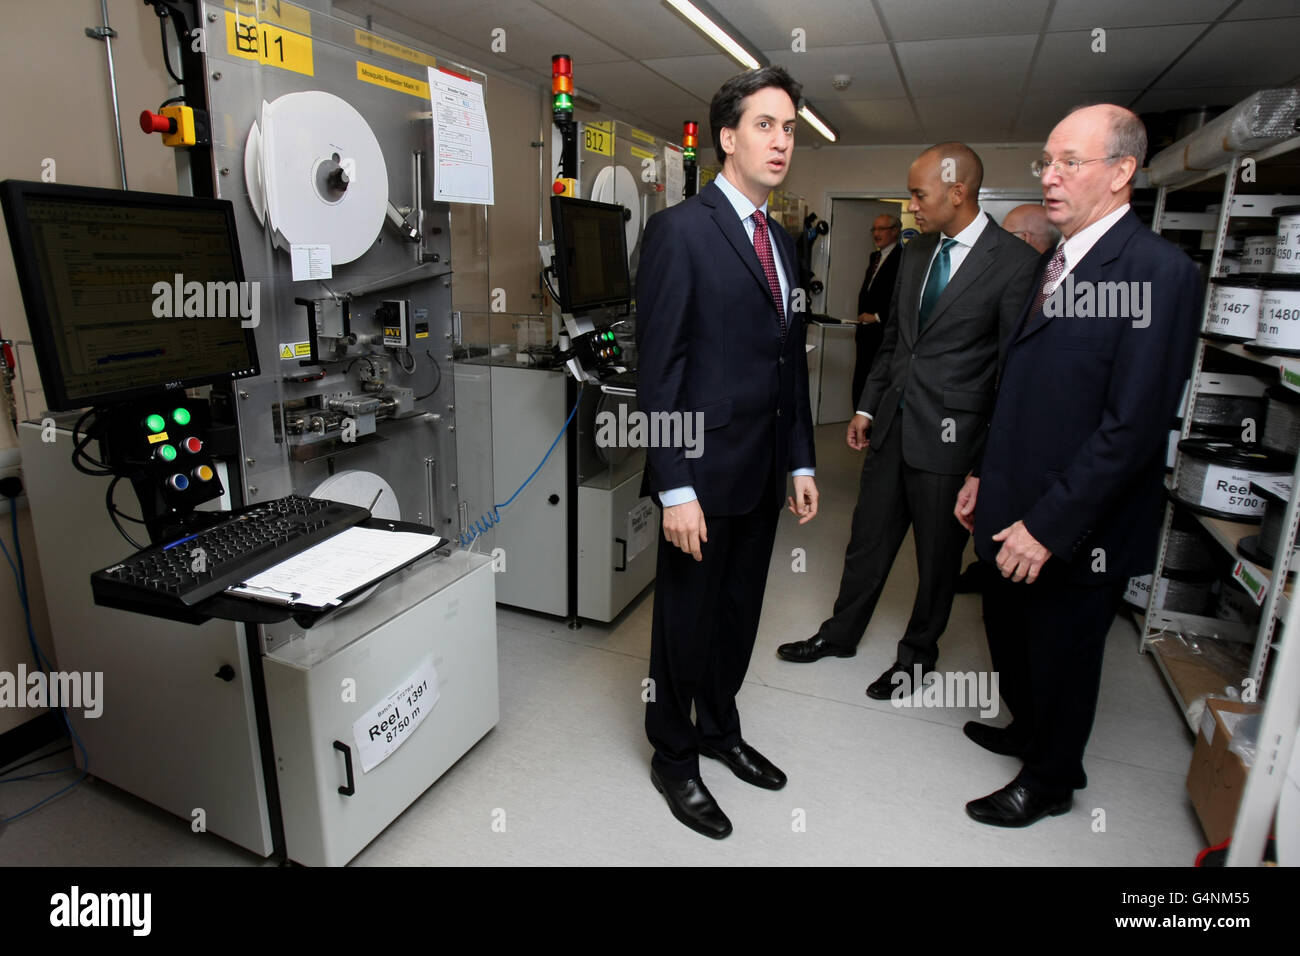 Labour Party leader Ed Miliband (left) and Shadow Business Secretary Chuka Umunna (centre) speak with Managing Director of TTP LabTech Dr Philip Blenkinsop during a visit to TTP group in Melbourn, Cambridgeshire. Stock Photo